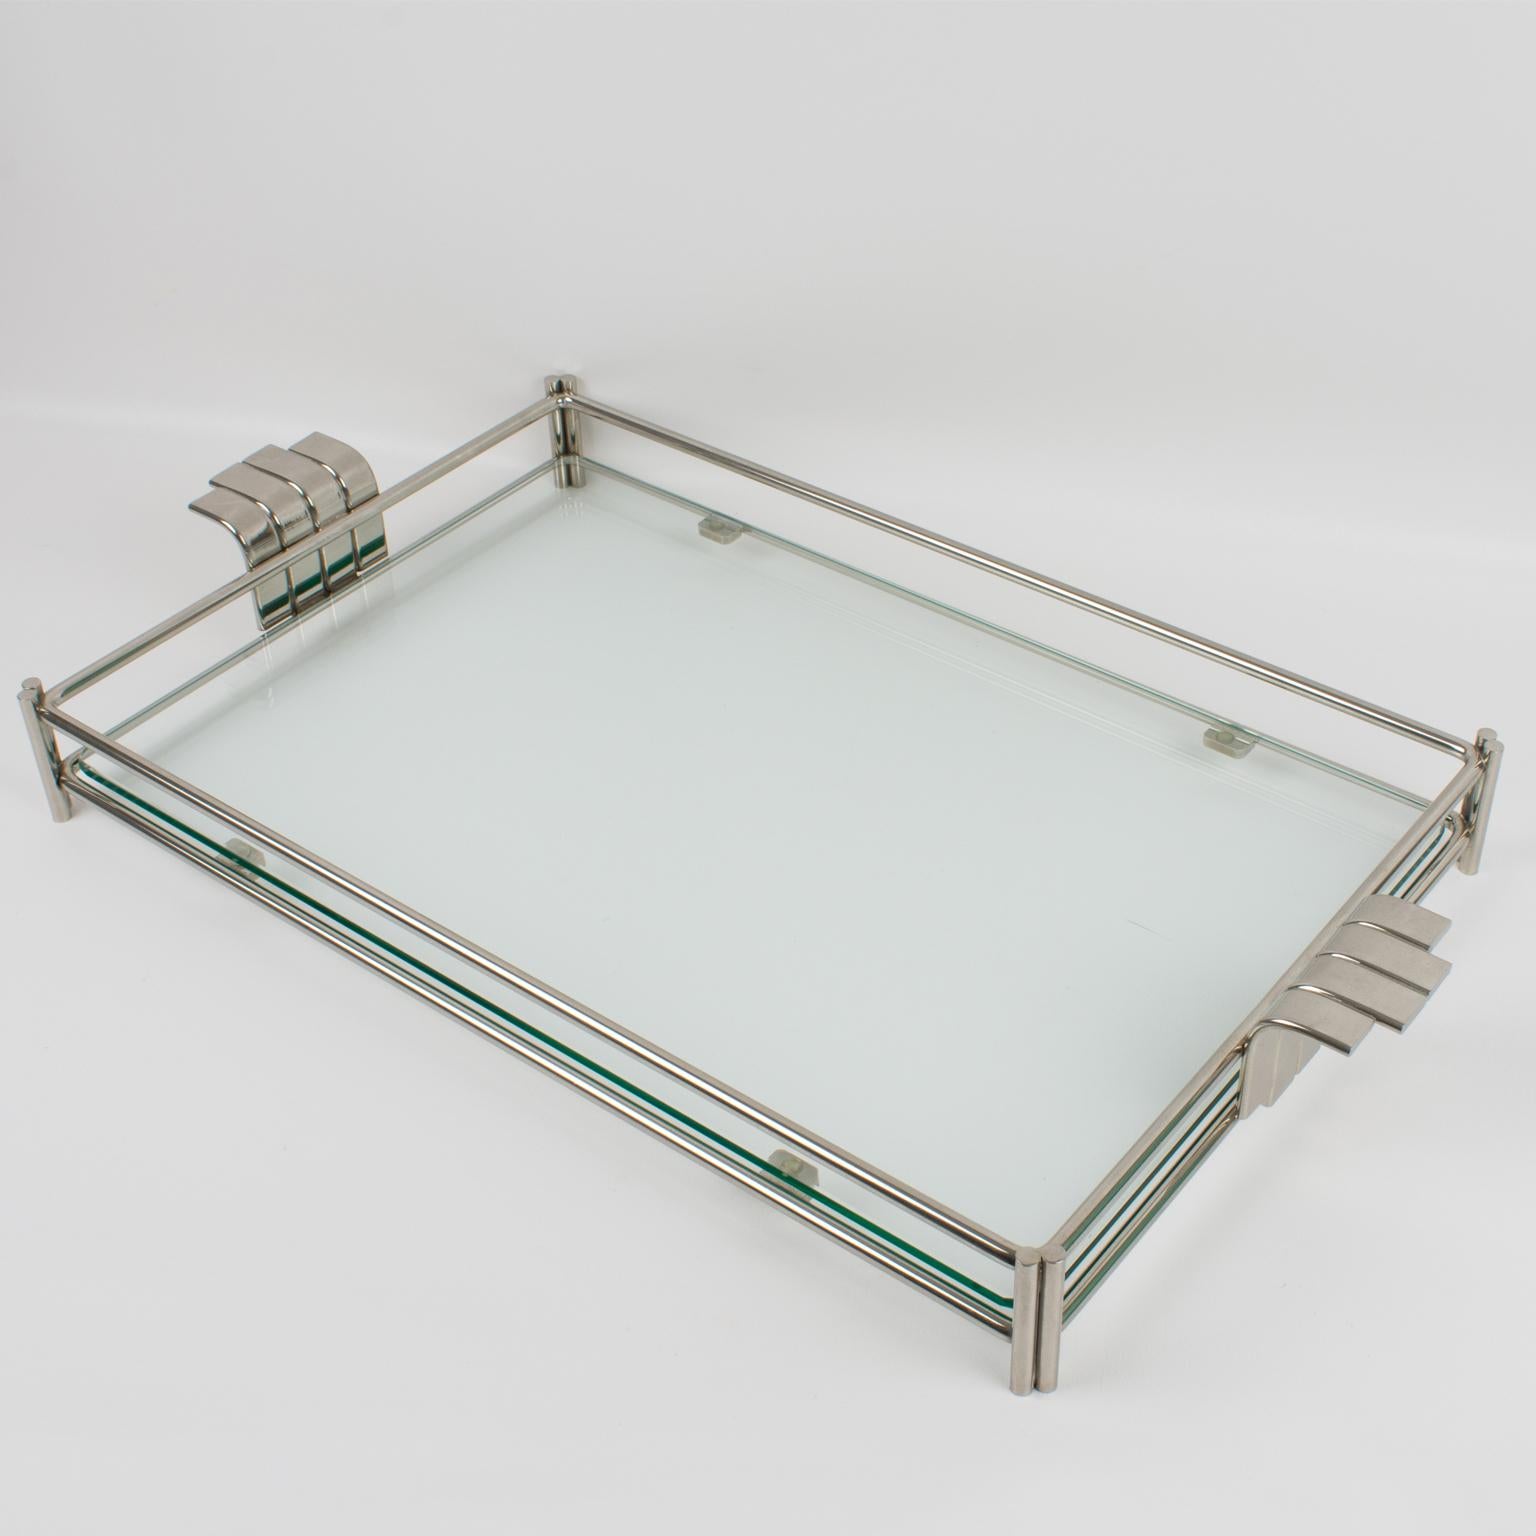 This sophisticated modernist barware serving tray platter was designed for Christian Dior Home Collection in the 1980s. The large rectangular butler shape is built with silvered metal framing and a thick glass slab insert. The tray is embellished